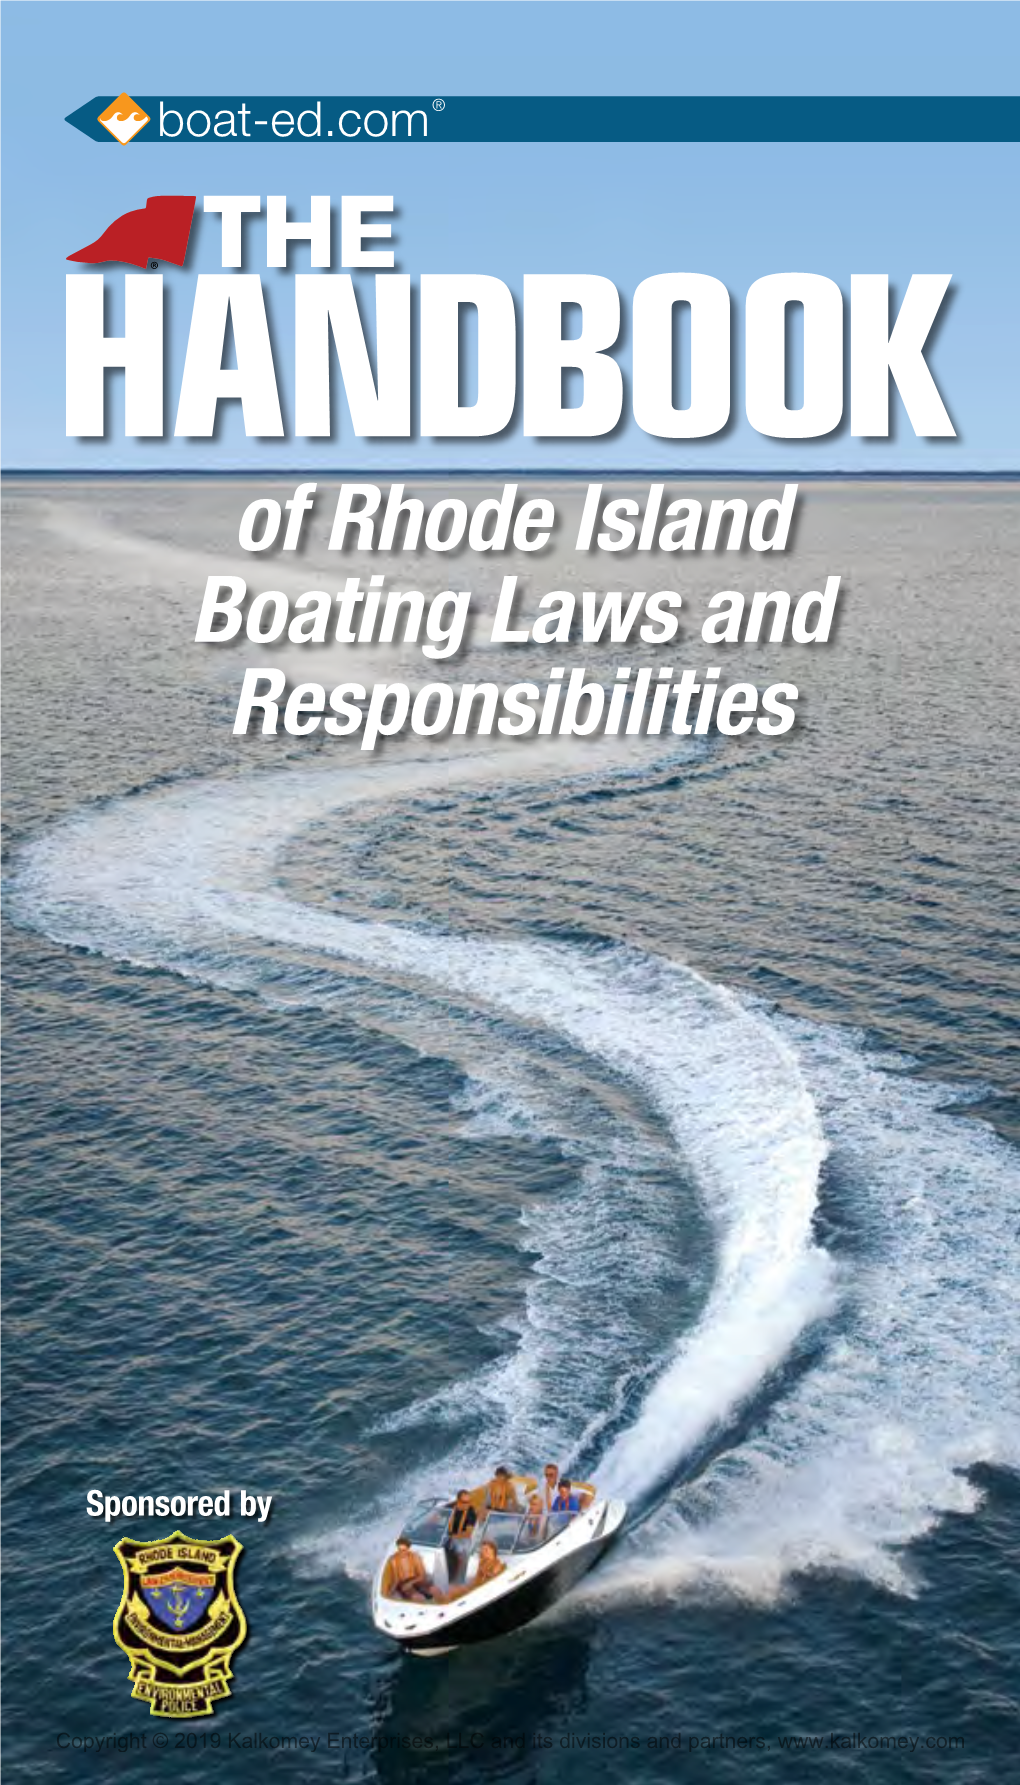 Of Rhode Island Boating Laws and Responsibilities